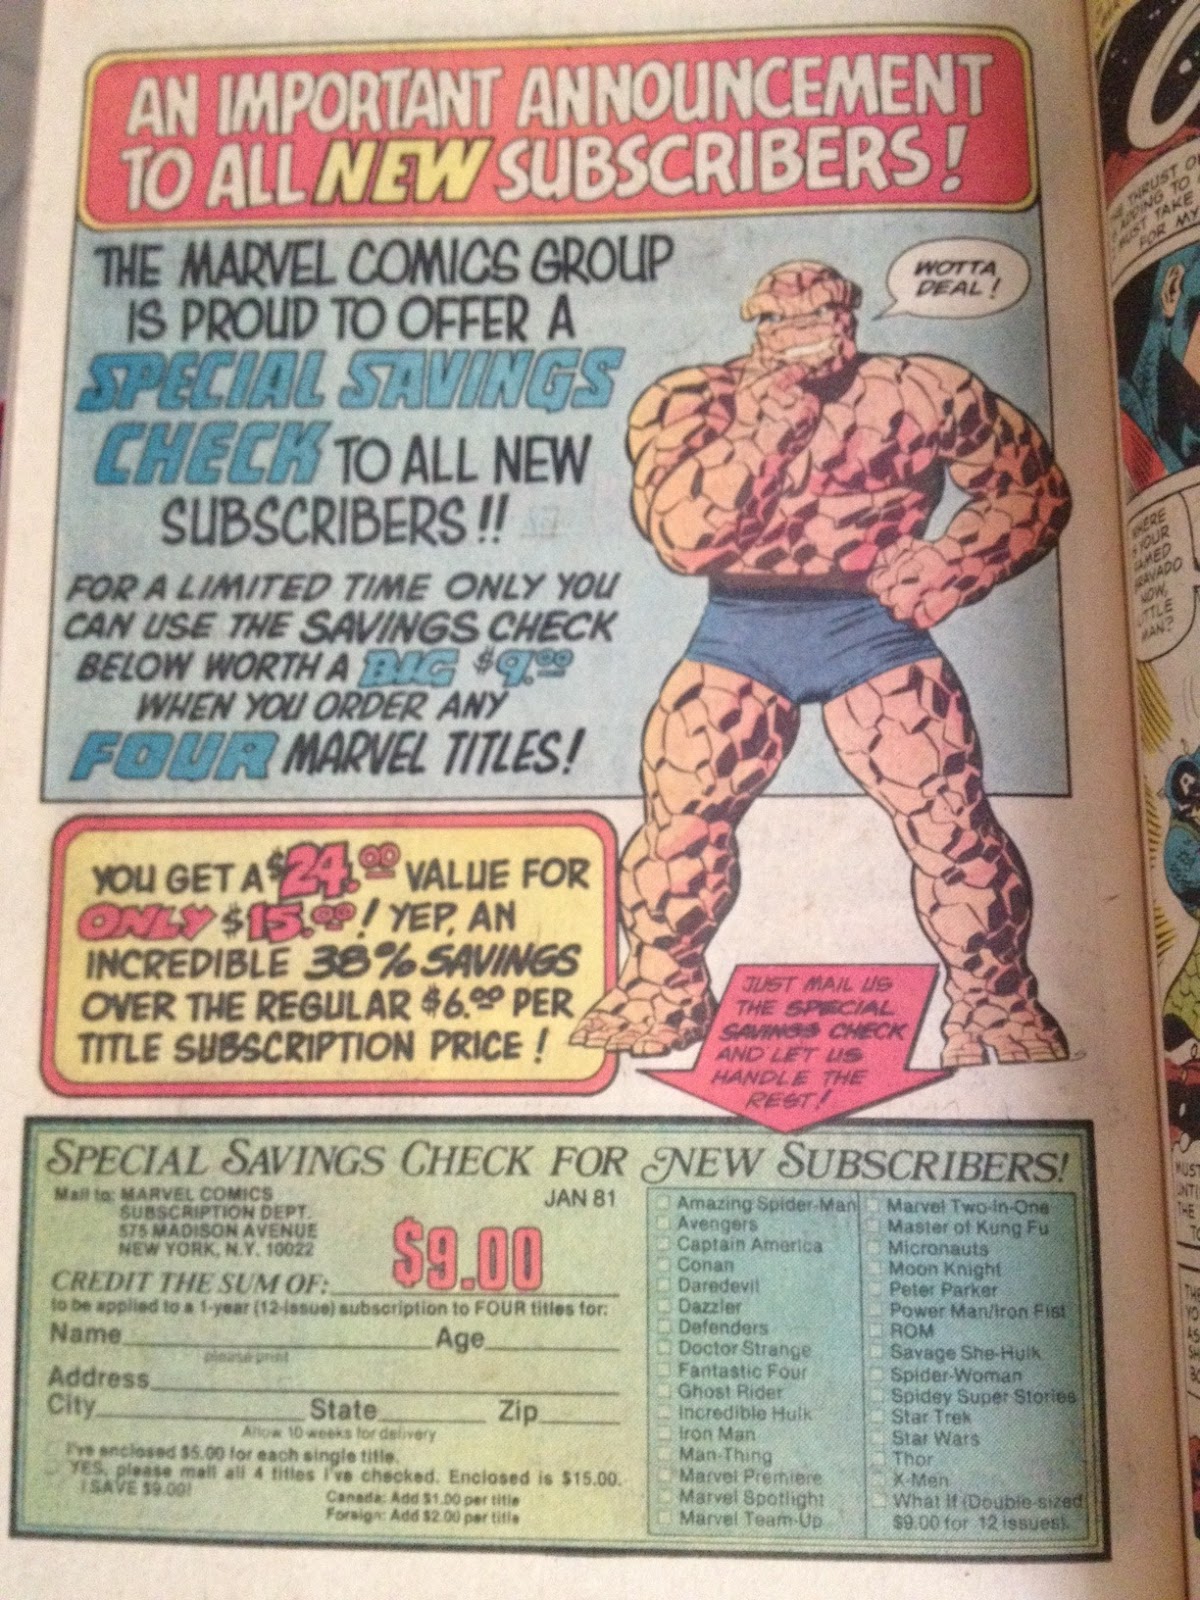 Marvel+Two+in+One+subscription+ad.JPG